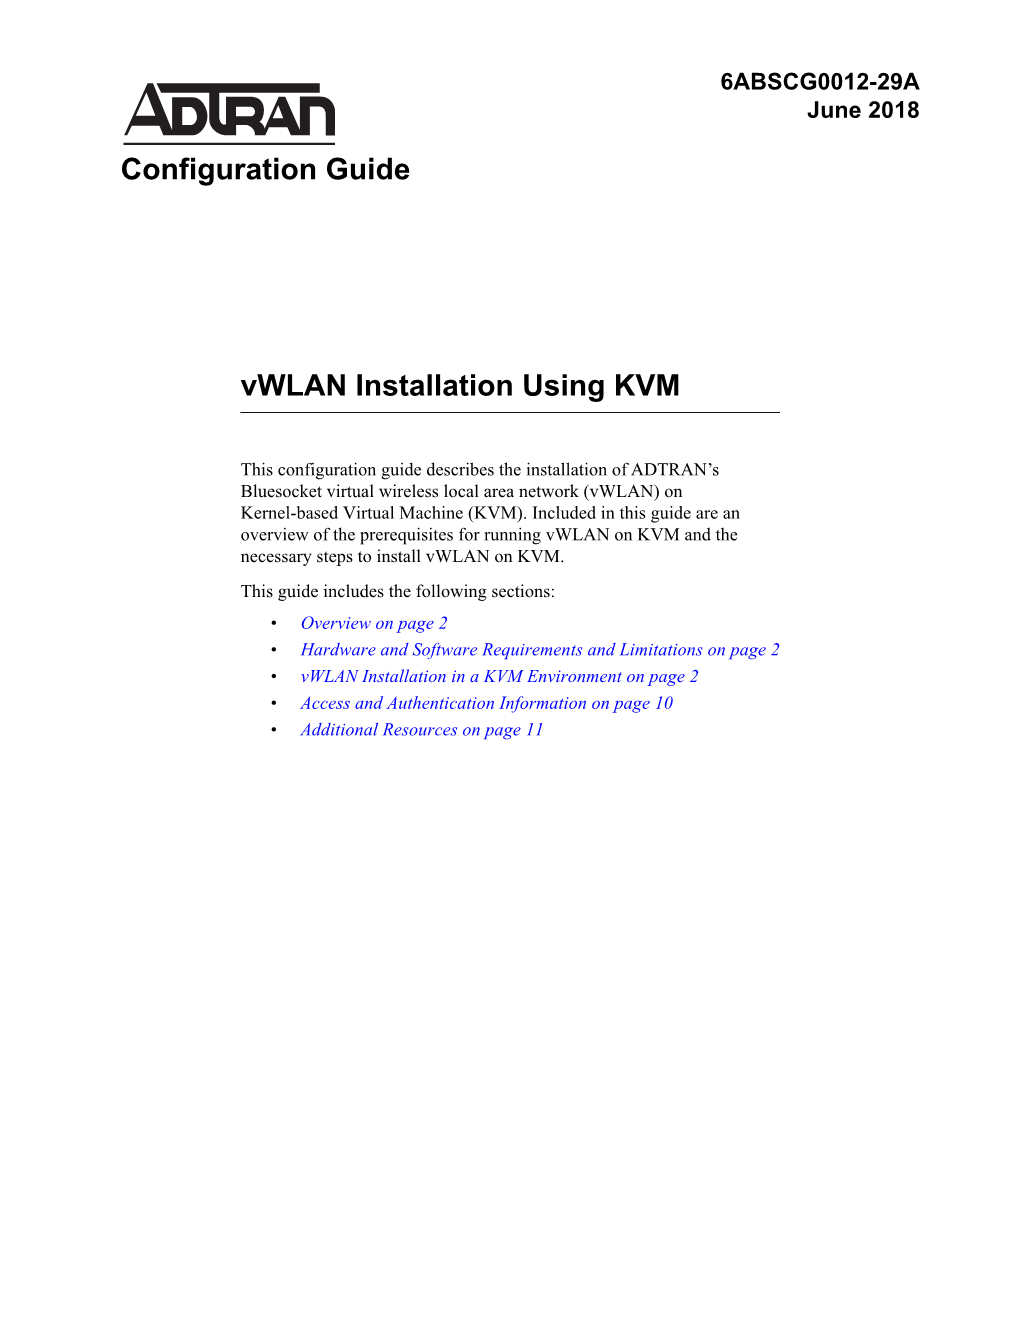 Configuration Guide Vwlan Installation Using